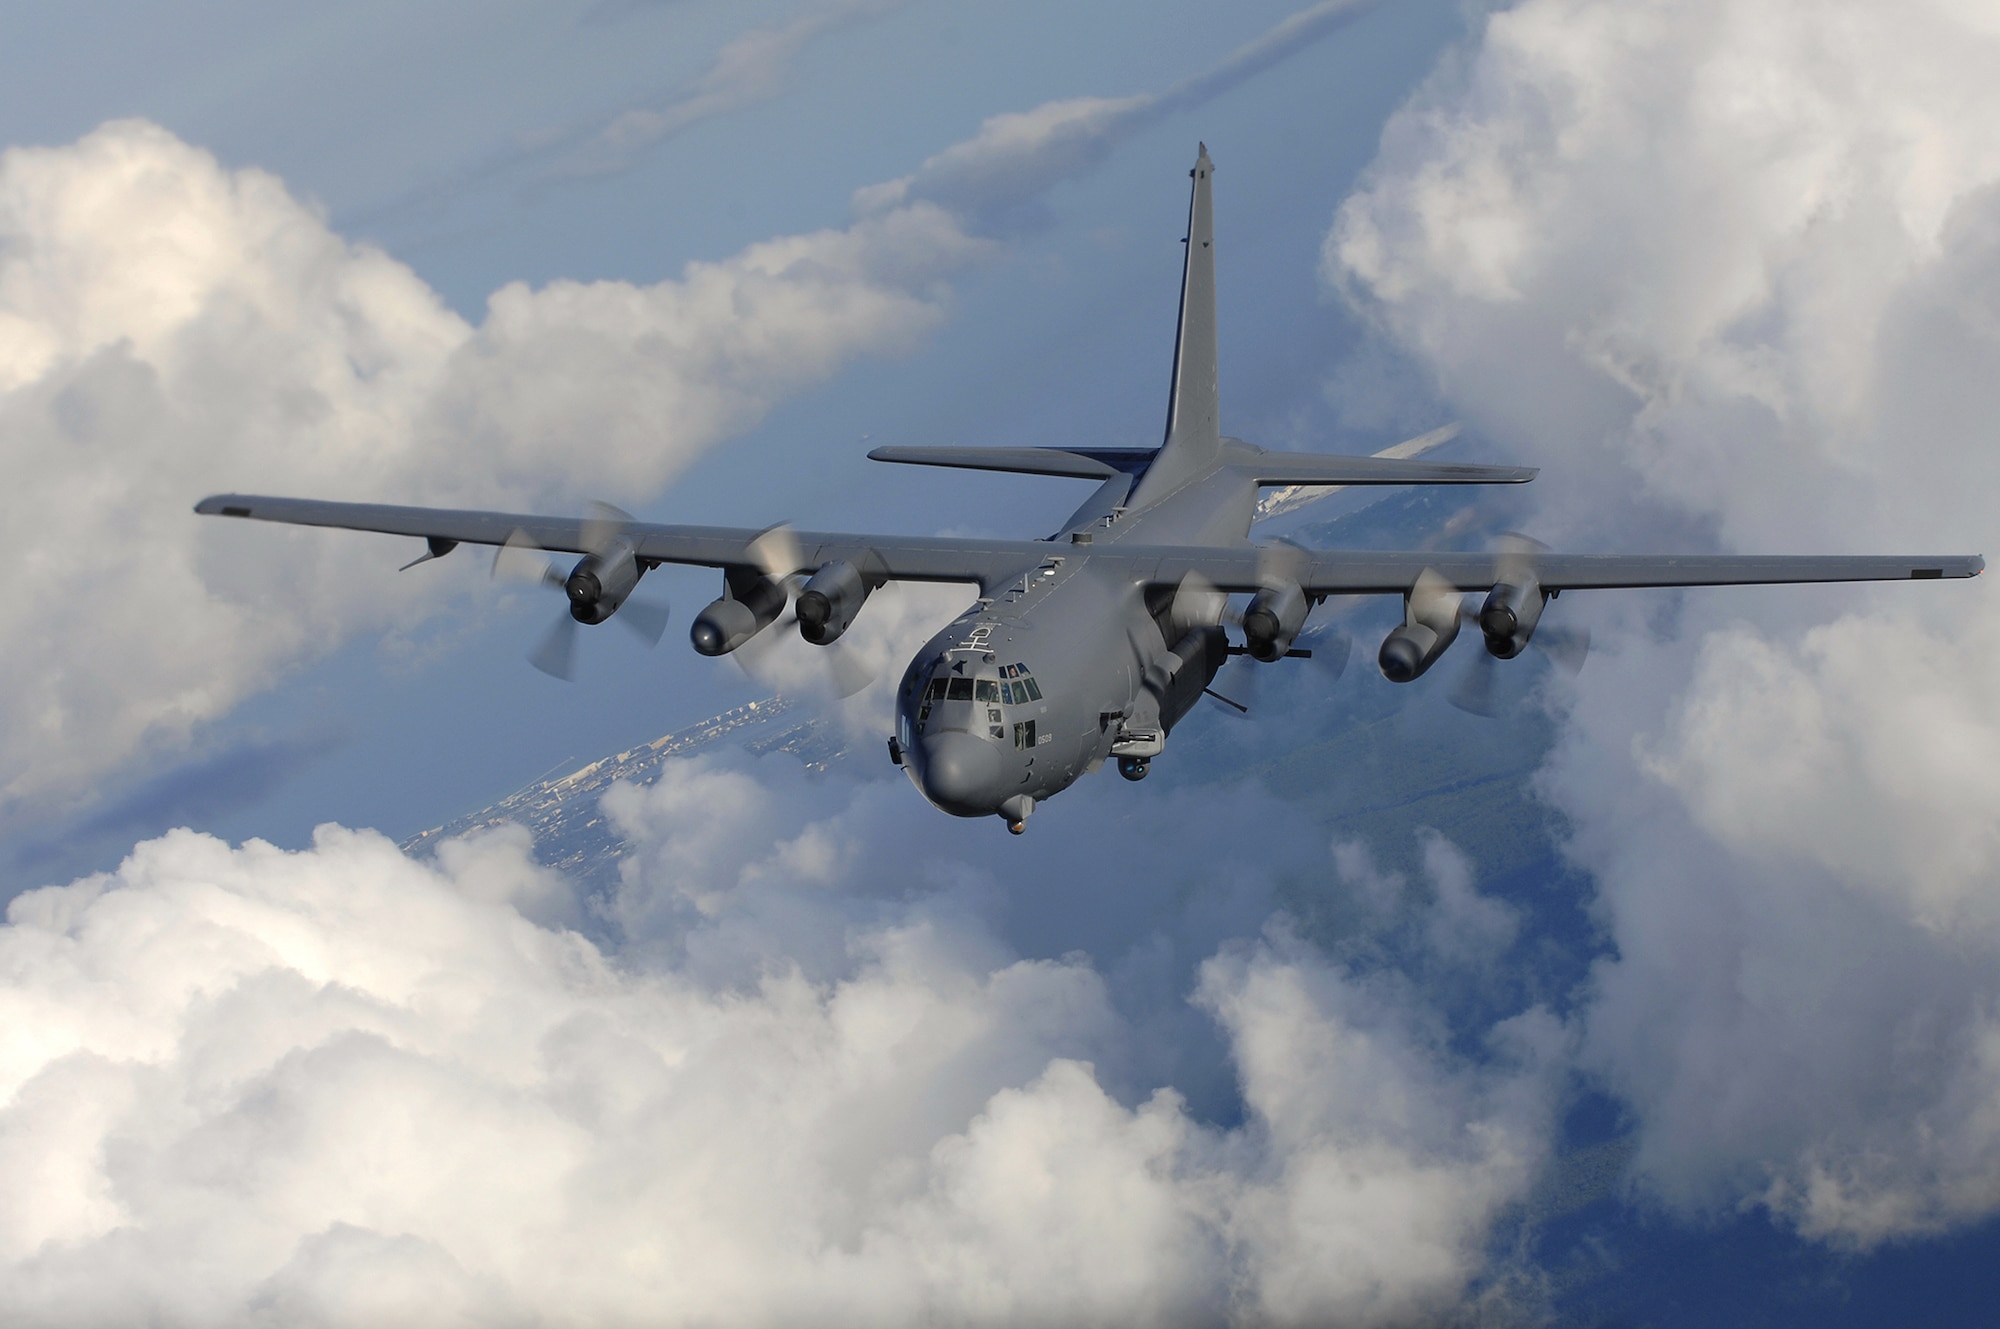 An AC-130U gunship from the 4th Special Operations Squadron, flies near Hurlburt Field, Fla., Aug. 20. The AC-130 gunship's primary missions are close air support, air interdiction and force protection. (U.S. Air Force photo/ Senior Airman Julianne Showalter) 


